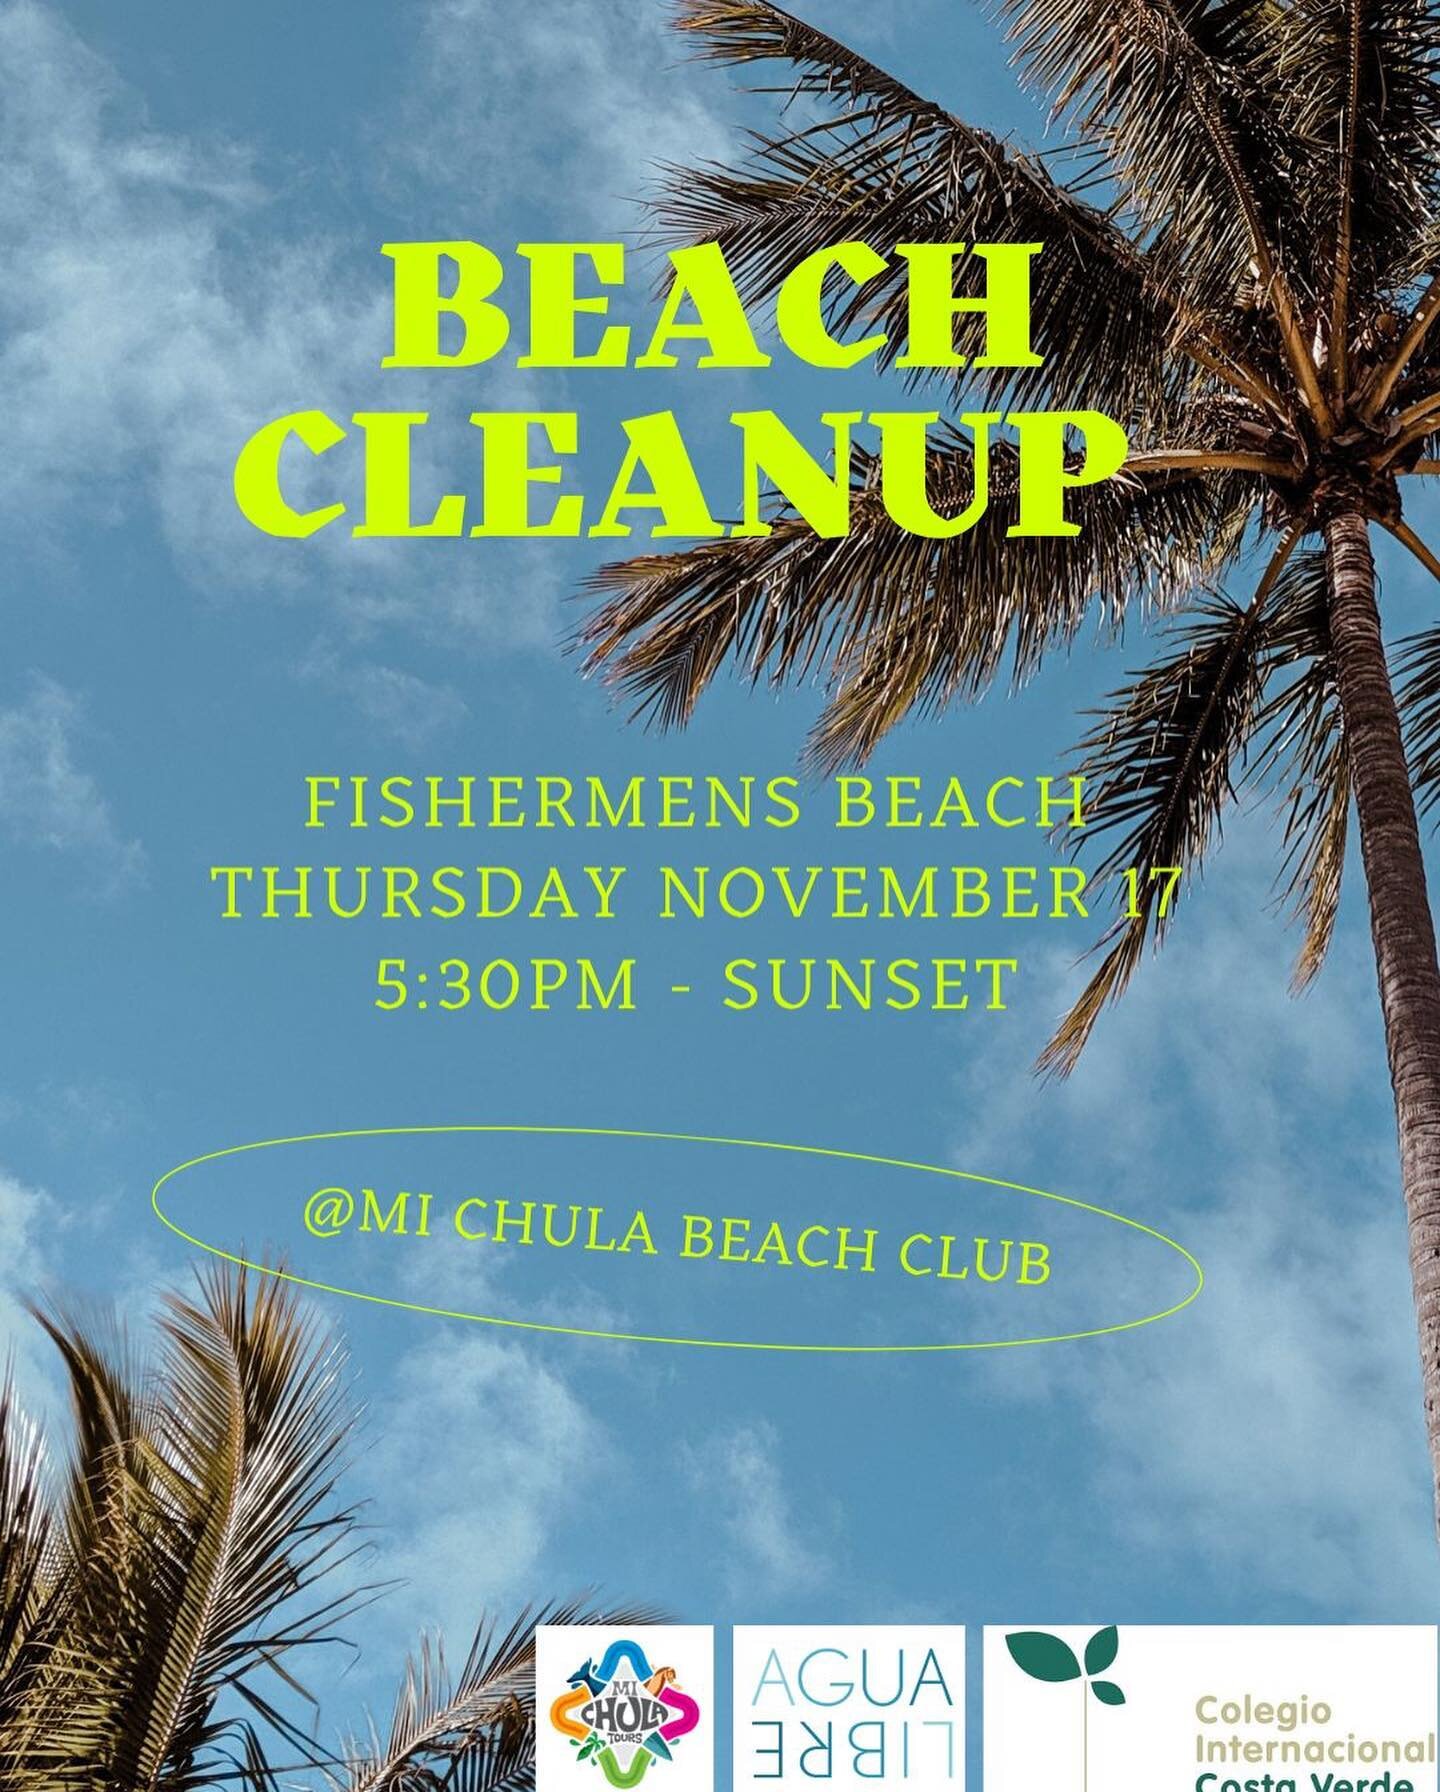 Beach Cleanup Thursday @michulabeachclub See you there!

Limpieza de playa este jueves. &iexcl;Nos@vemos all&iacute;!